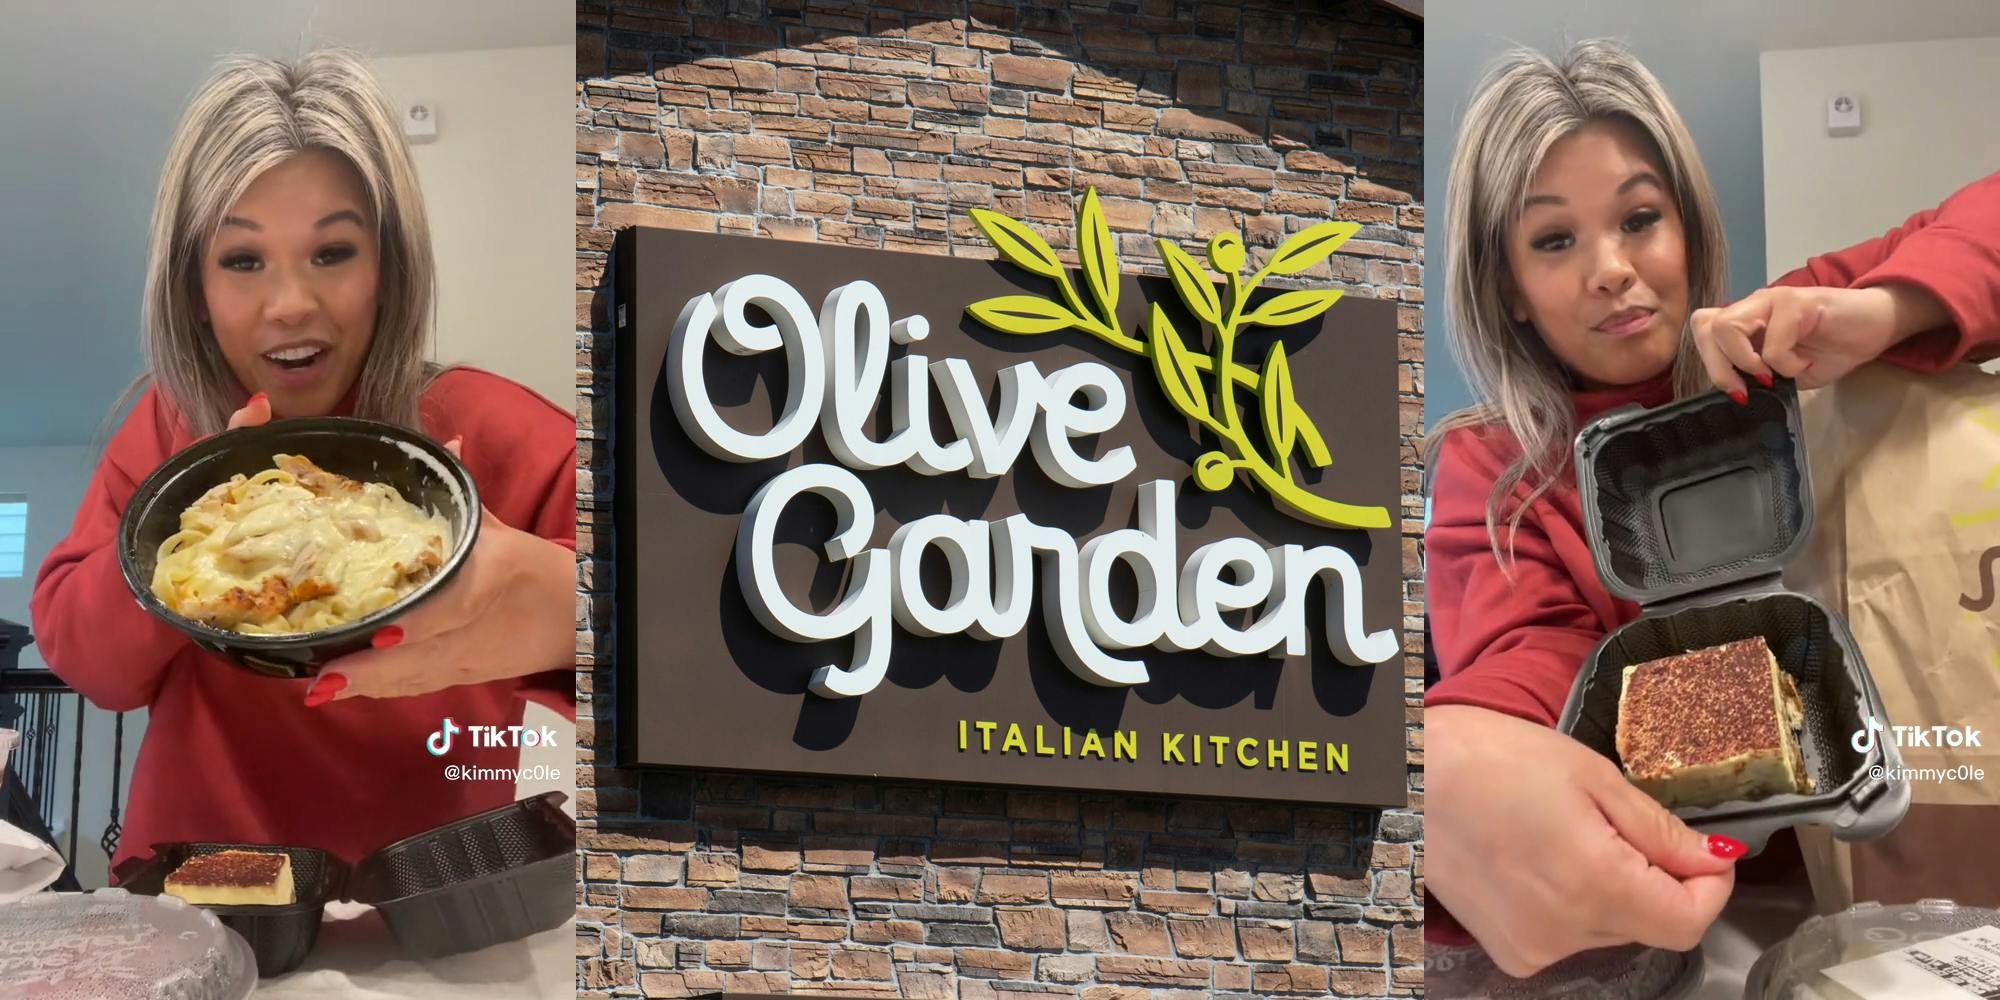 'Do kids even eat this much? Haha looks like a good deal': Woman shares all the food she gets through the Olive Garden 'kids' meal hack'